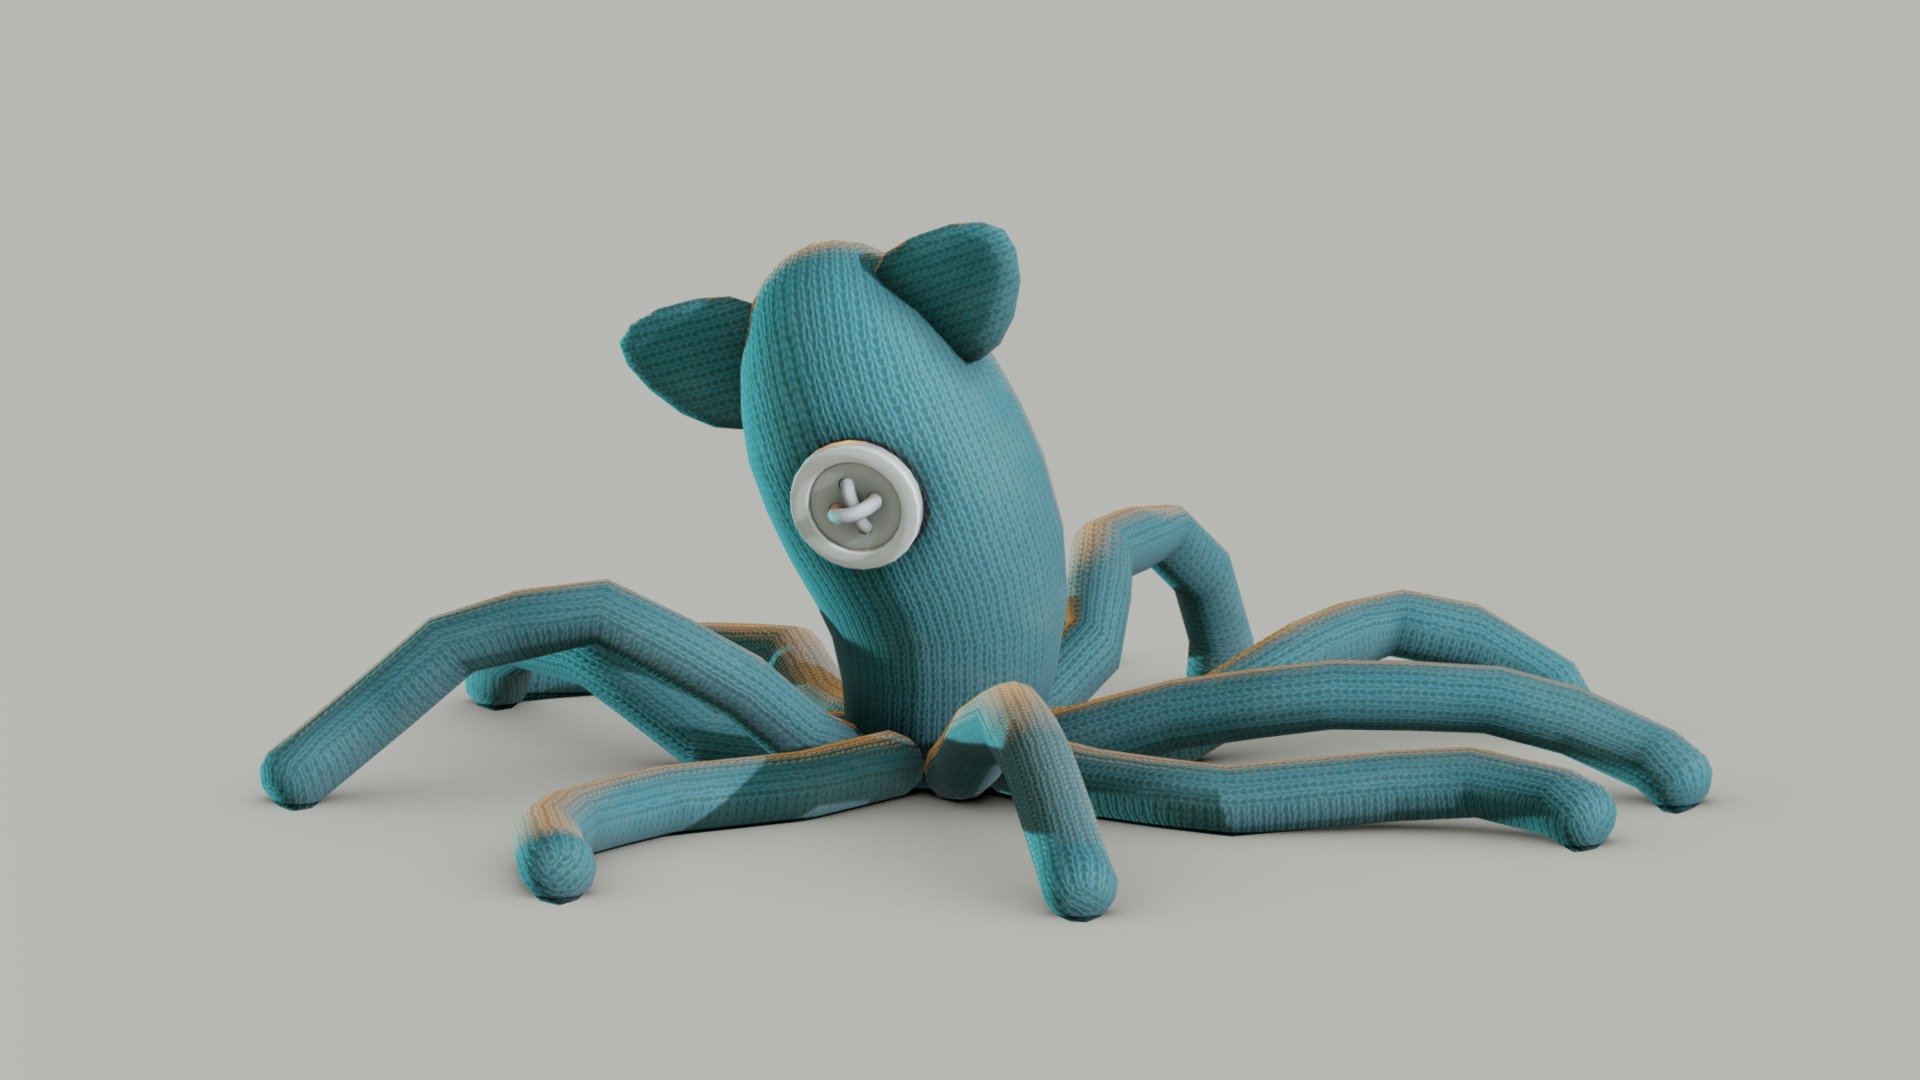 Squid Plush Toy for your renders and games

Rig Information:

Rigged mesh

Animation: none

Textures:

Diffuse color, Roughness, Normal

All textures are 2K

Files Formats:

Blend

Fbx

Obj - Squid Plush Toy - Buy Royalty Free 3D model by Vanessa Araújo (@vanessa3d) 3d model